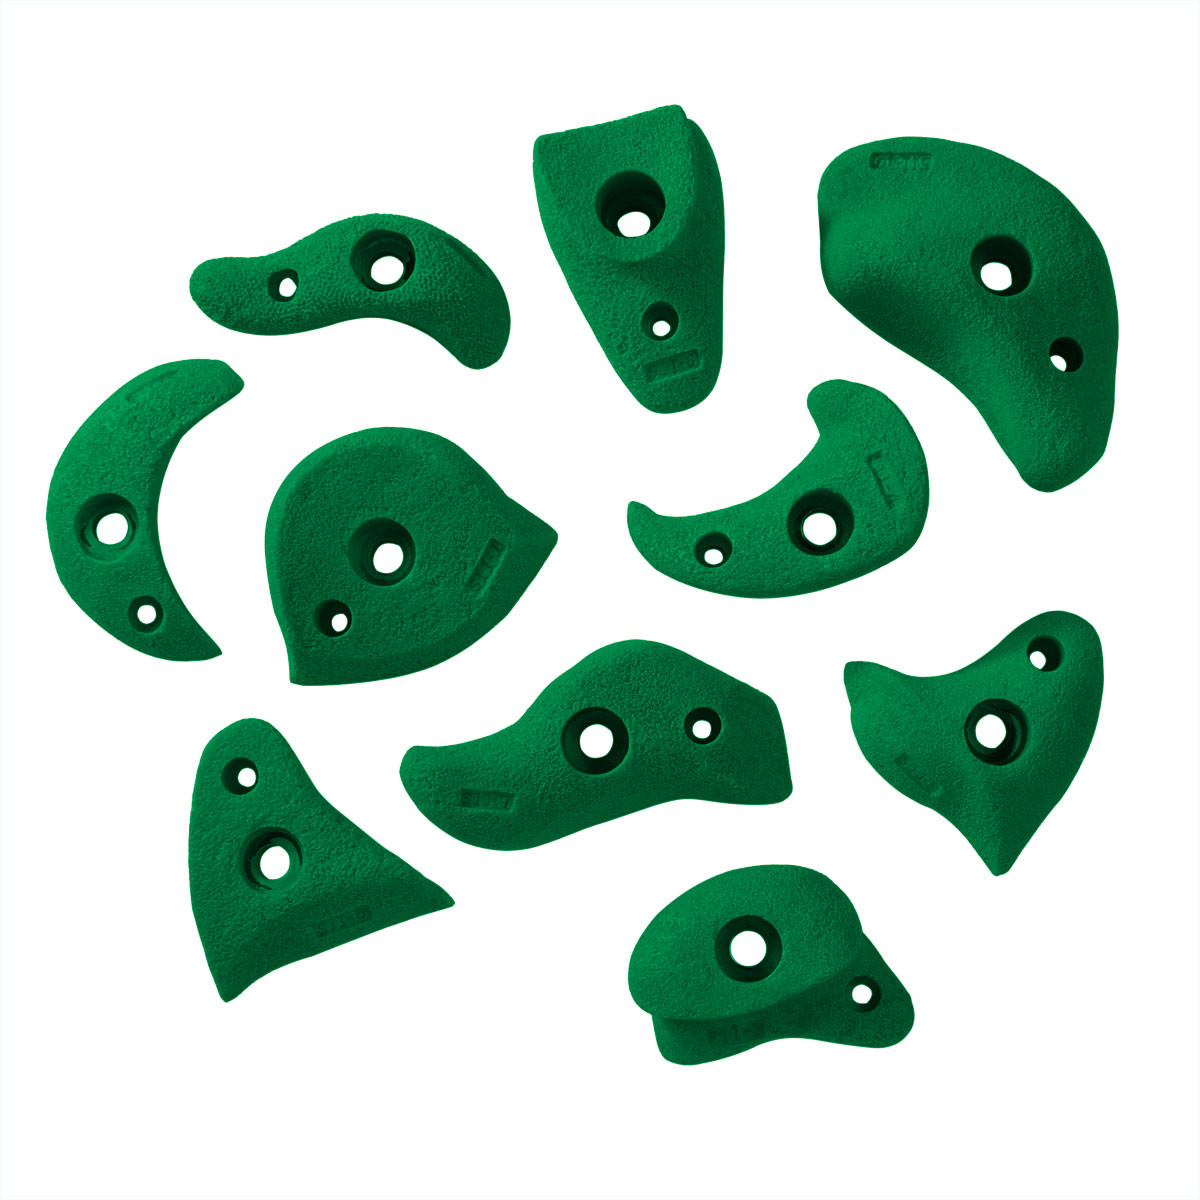 Composite Sand Hand Holds - Green